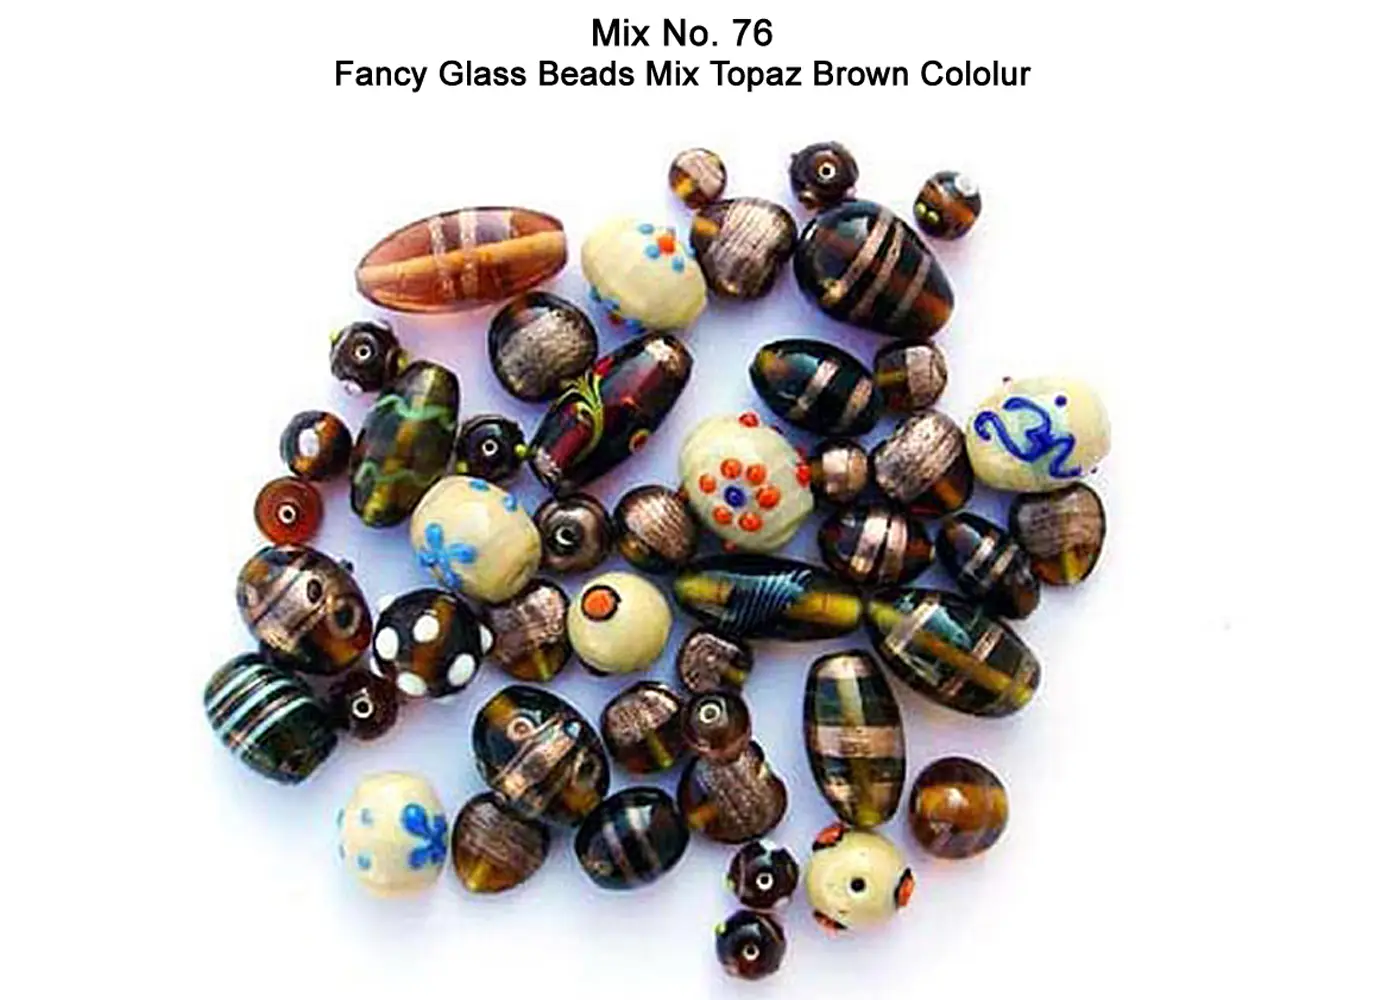 Fancy Glass Beads in Topaz Brown color